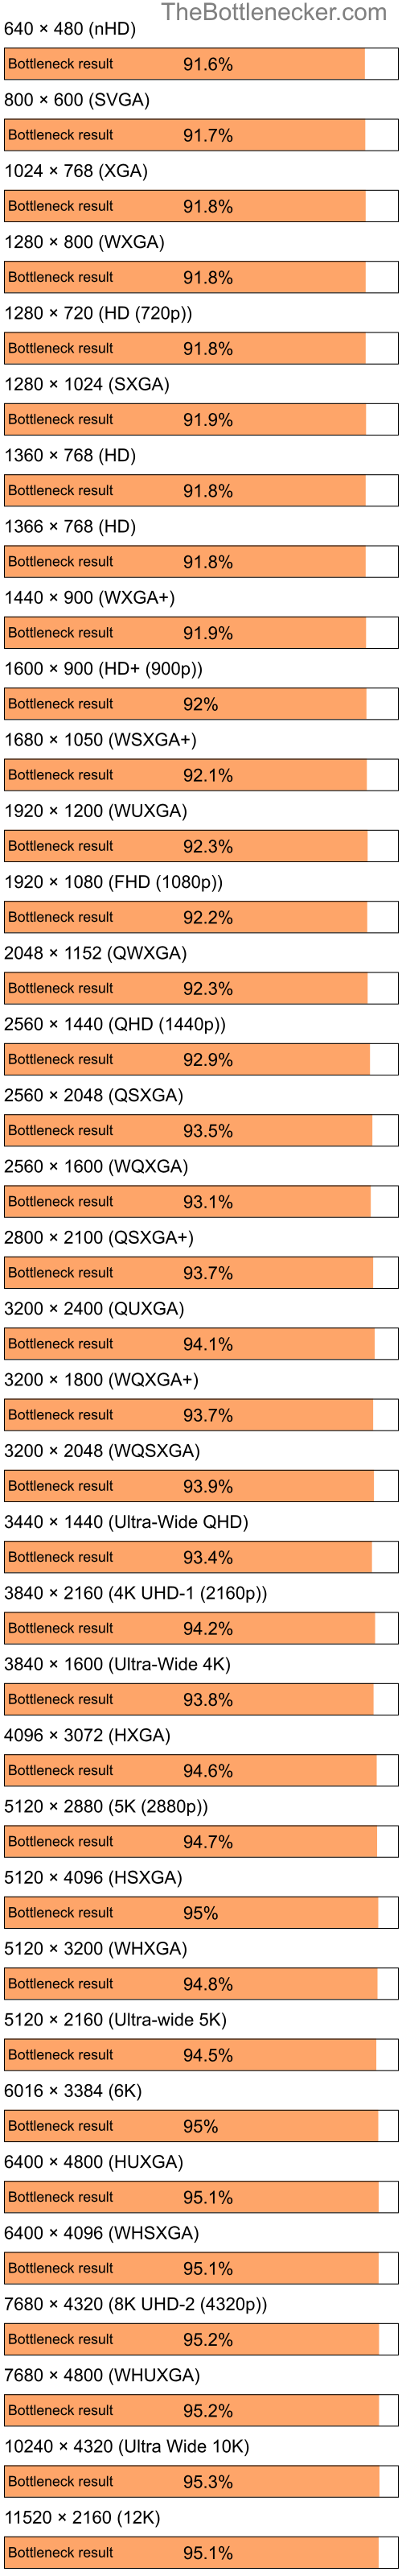 Bottleneck results by resolution for Intel Atom Z520 and AMD Radeon 9250 in7 Days to Die